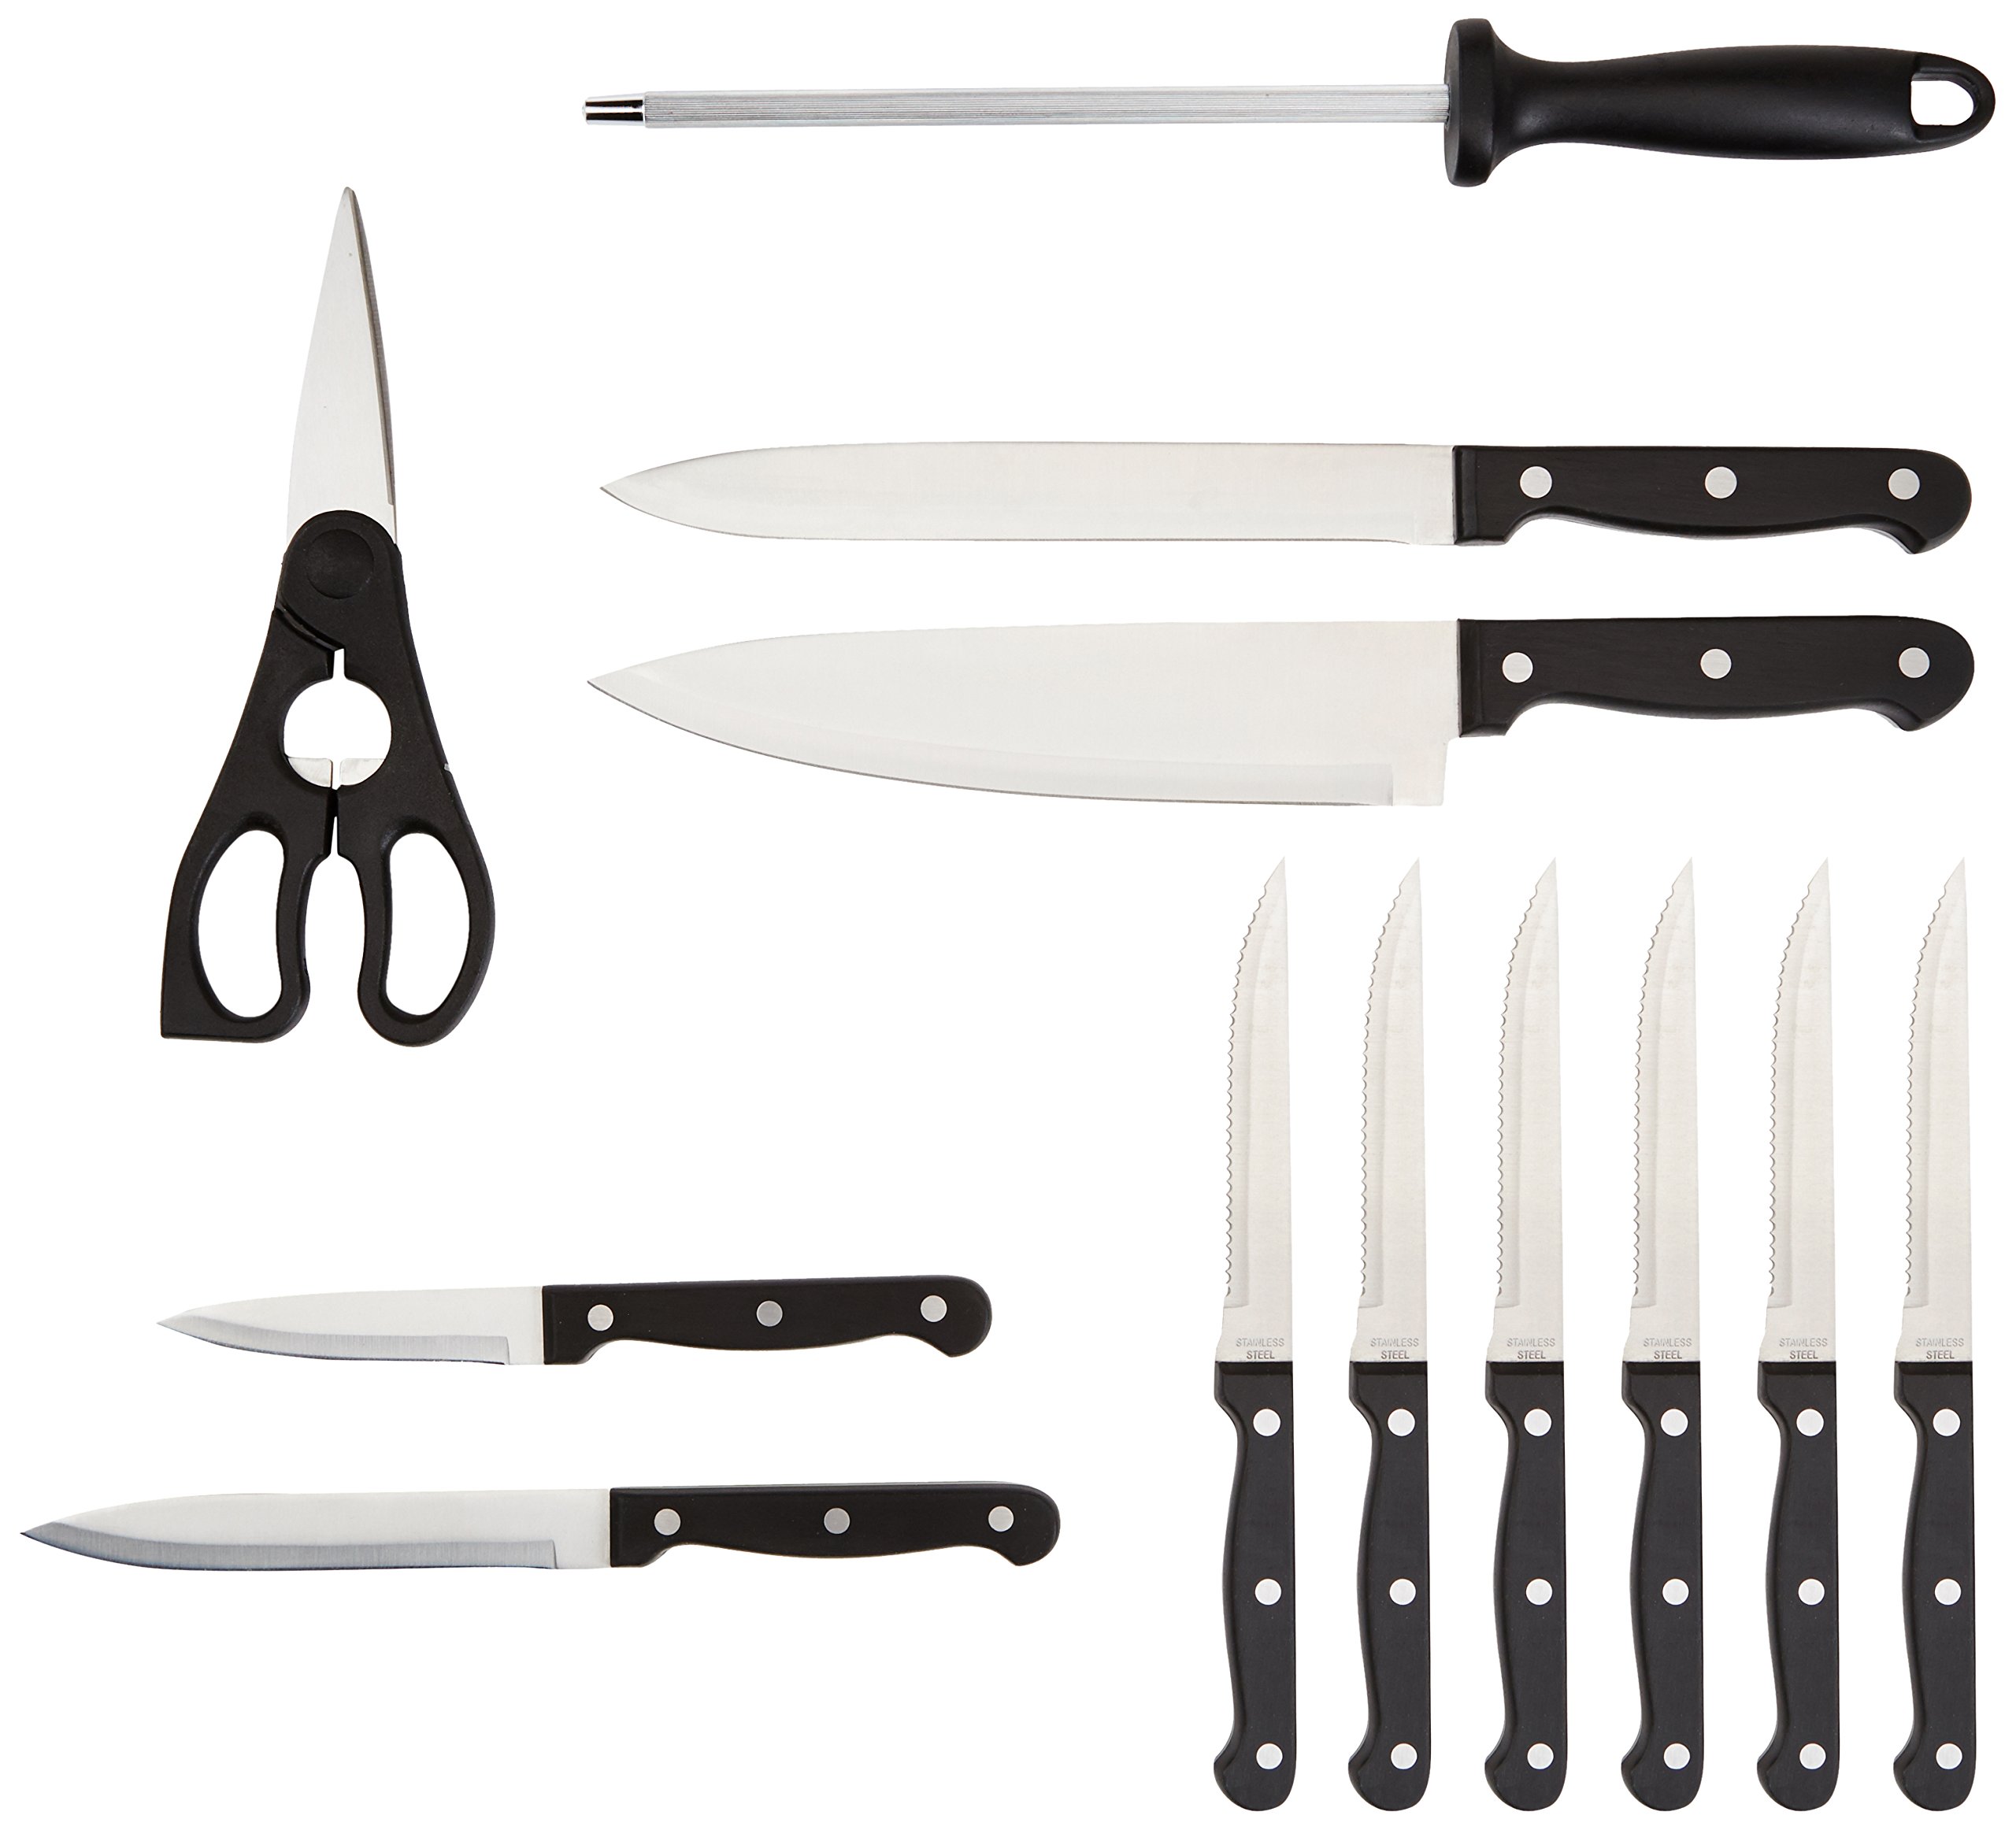 AmazonBasics 16-Piece Kitchen Dinnerware Set, Plates, Bowls, Mugs, Service for 4, White & 14-Piece Kitchen Knife Set with High-Carbon Stainless-Steel Blades and Pine Wood Block